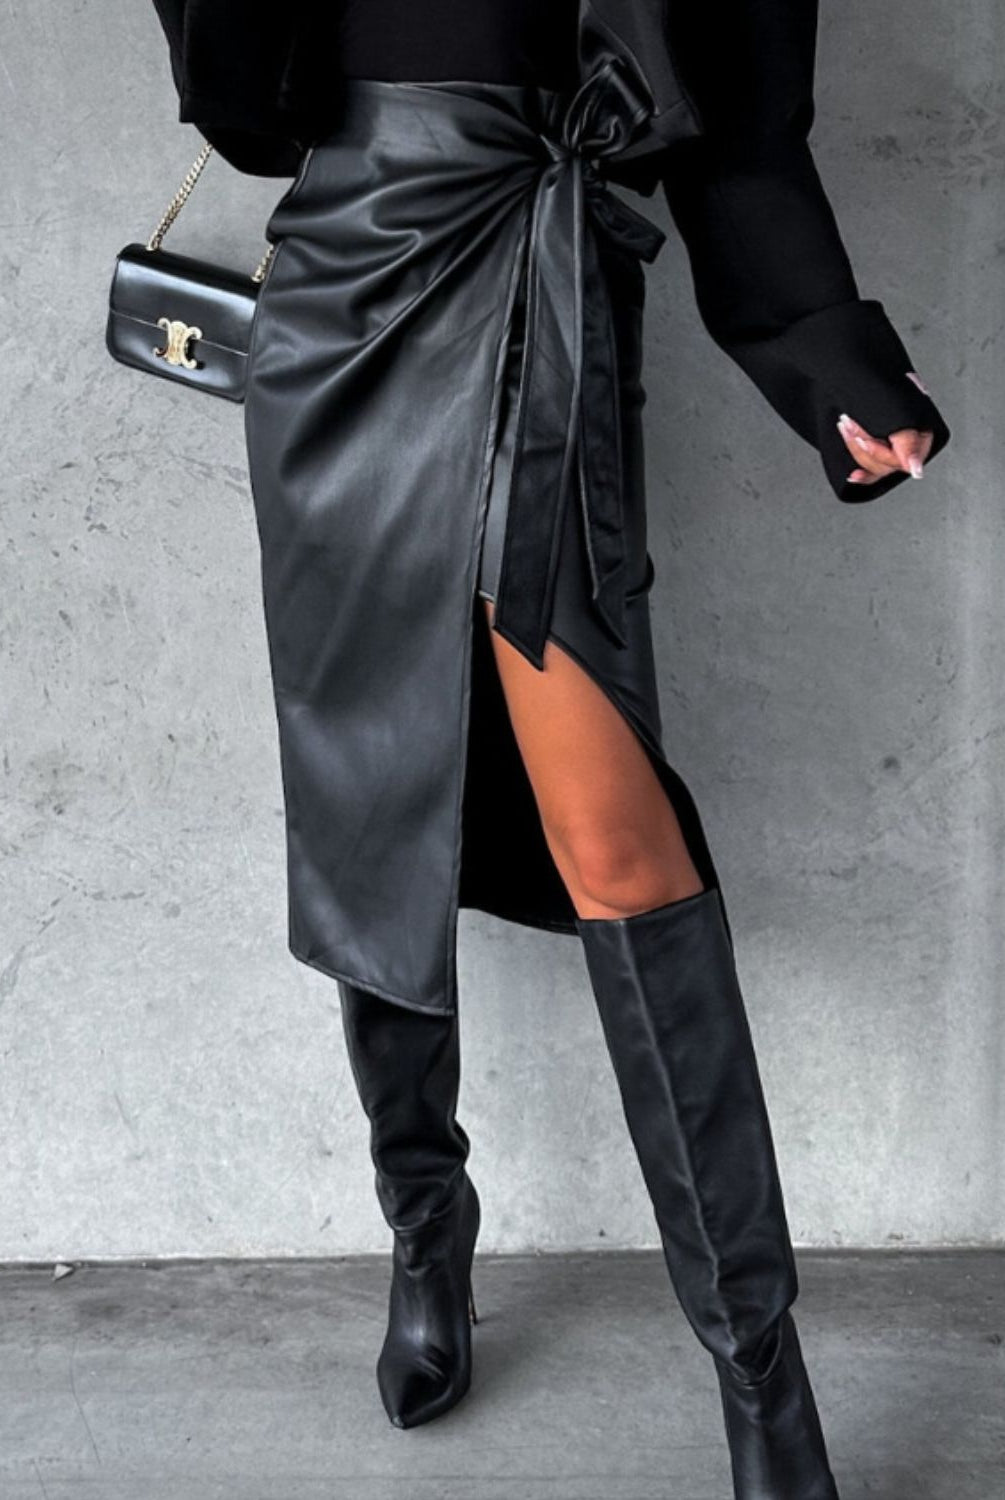 Woman posing in a chic high-waisted black skirt with tie detail and thigh-high slit, paired with a strapless top, knee-high boots, and a small black shoulder bag, against an industrial grey background.